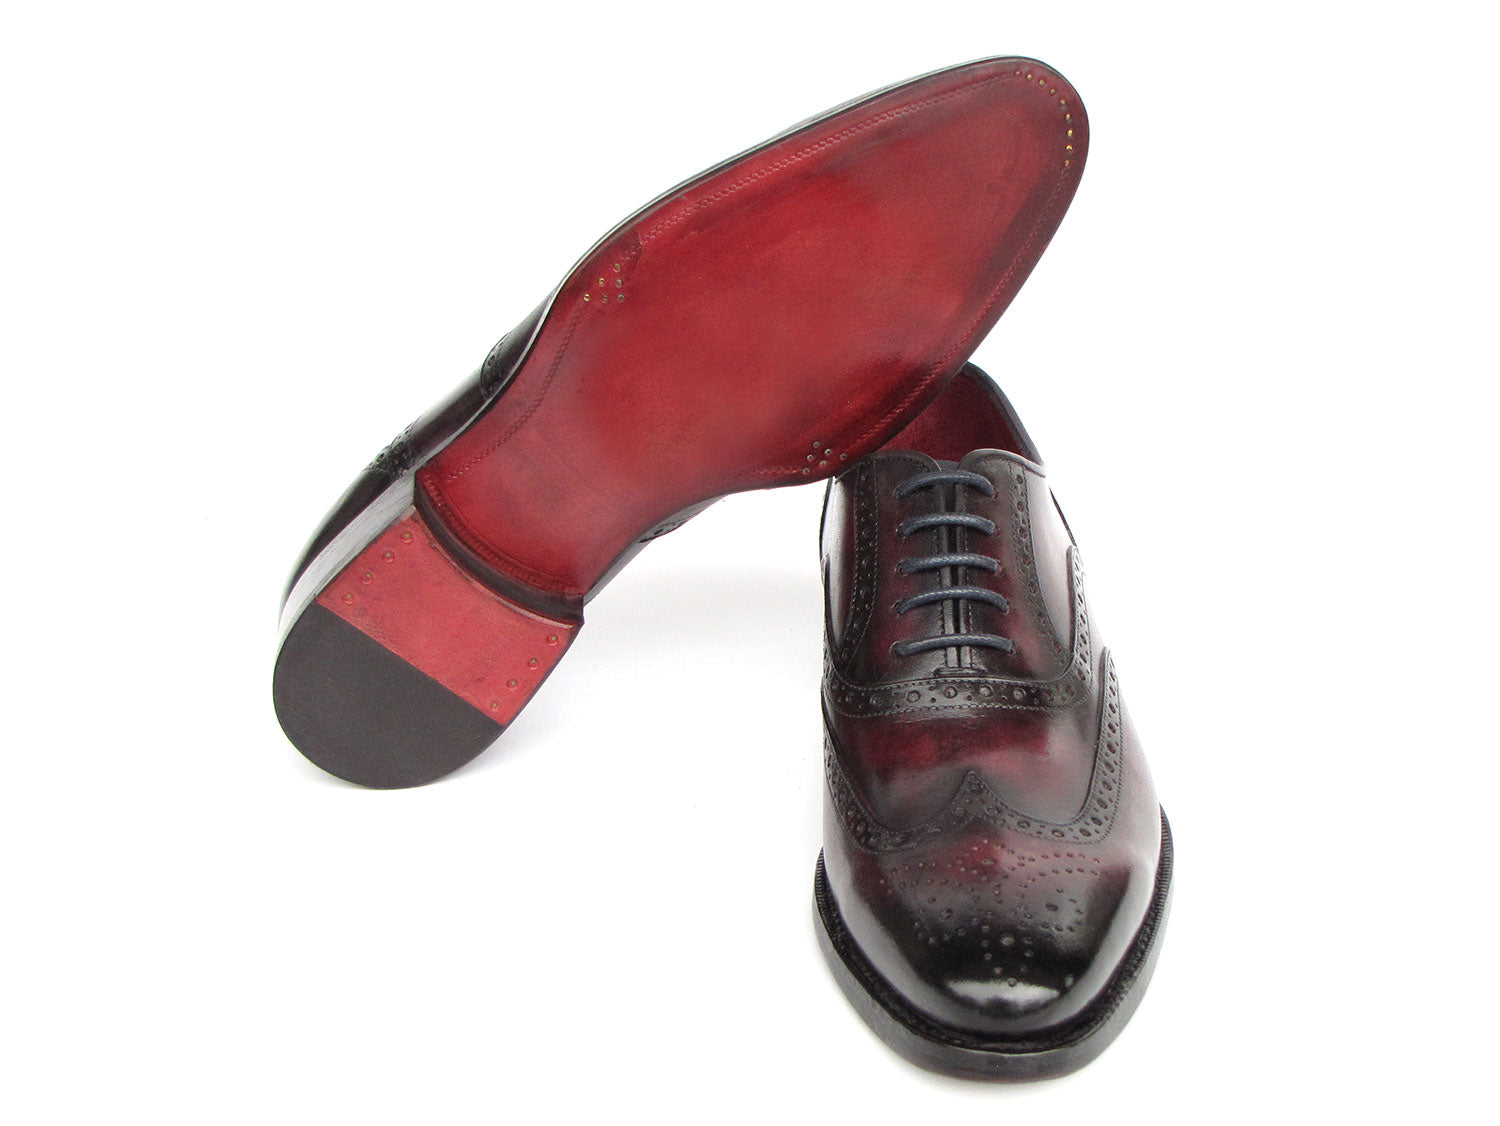 Paul Parkman Bordeaux Burnished Goodyear Welted Wingtip Oxford Shoes - 66BRD94